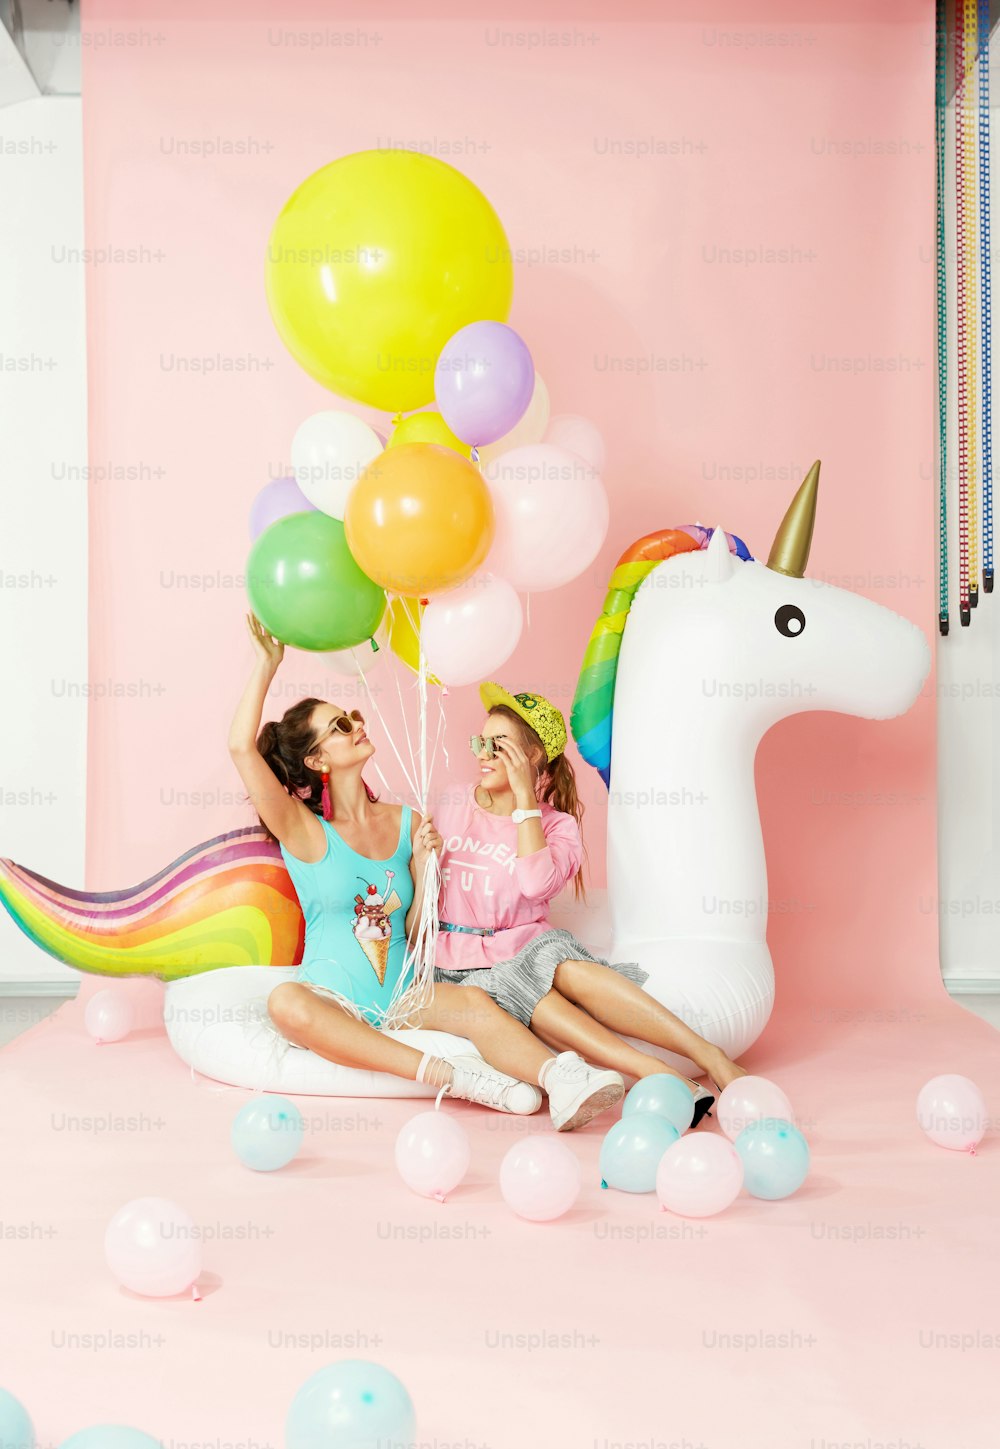 Summer Fashion Girls Having Fun With Balloons On Unicorn Float. Beautiful Smiling Women In Fashionable Clothes And Swimwear With Colorful Balloons On Pink Background. Women Style. High Quality Image.